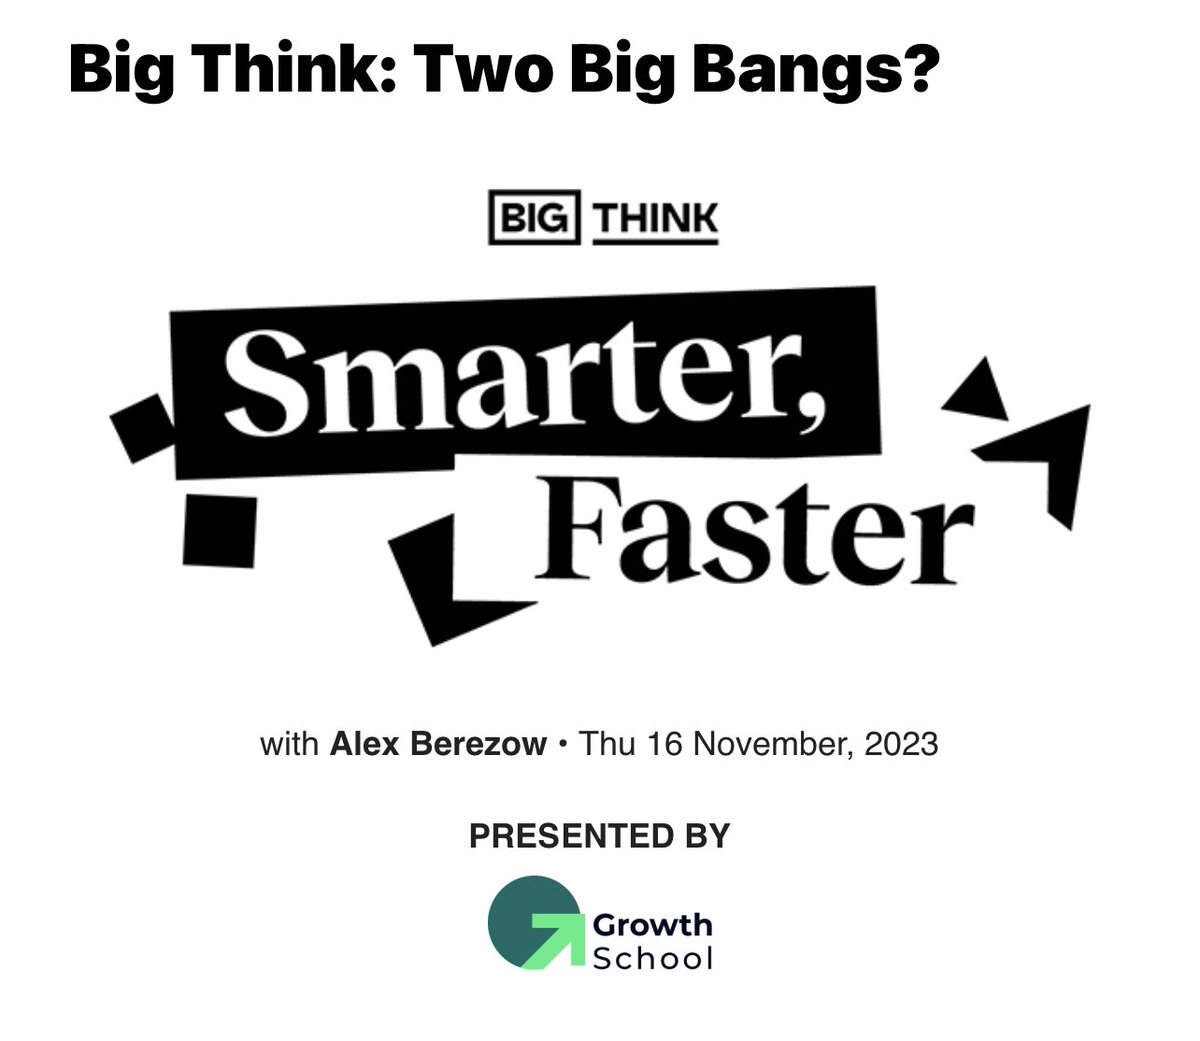 #BigBangThinking at @EnclaveAcademy cleverly names ways to energize agile minds with “Aha!, Oh!, Wow!,” and other #MindBang responses to startlement.

#InviteYourMind to be  alert for and responsive to life’s unexpected occurrences.

Two Big Bangs? Wow!

bigthink.com/hard-science/t…